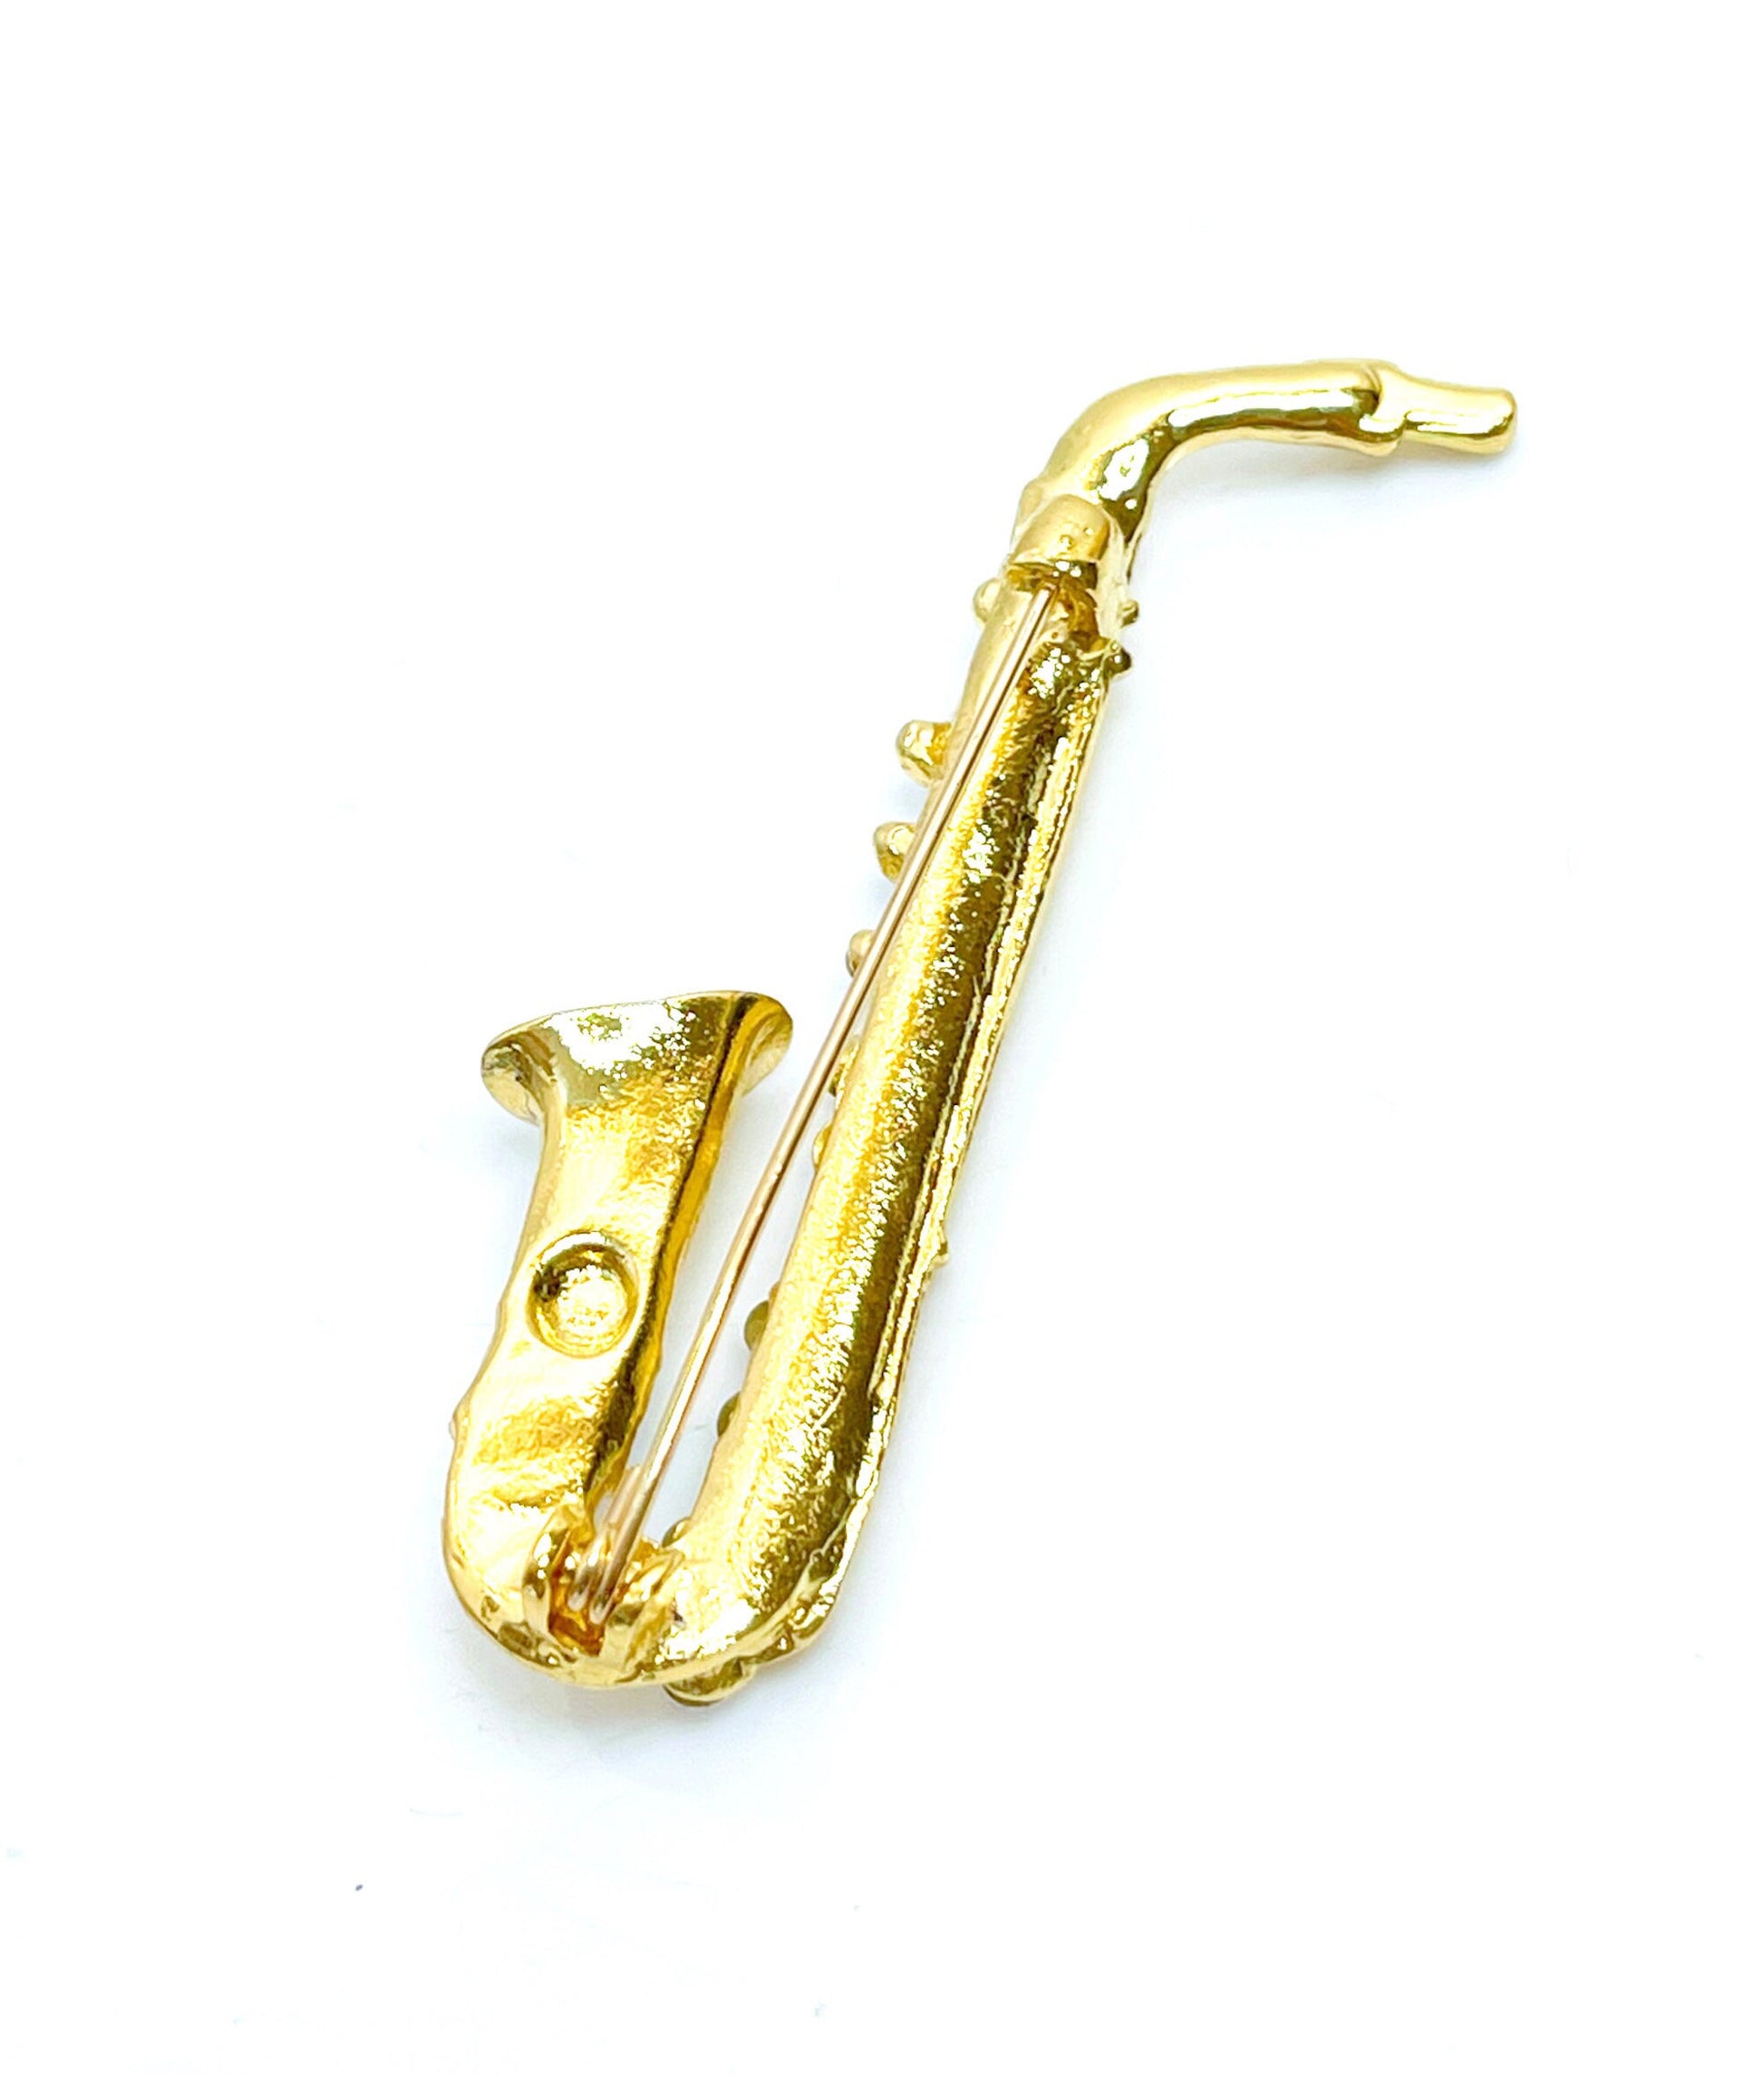 Gold Saxophone Brooch with Crystals, Fashion Brooch, Unisex Jewellery, Music Lovers Brooch, Wind Instrument Pin, Sax Lovers Gift